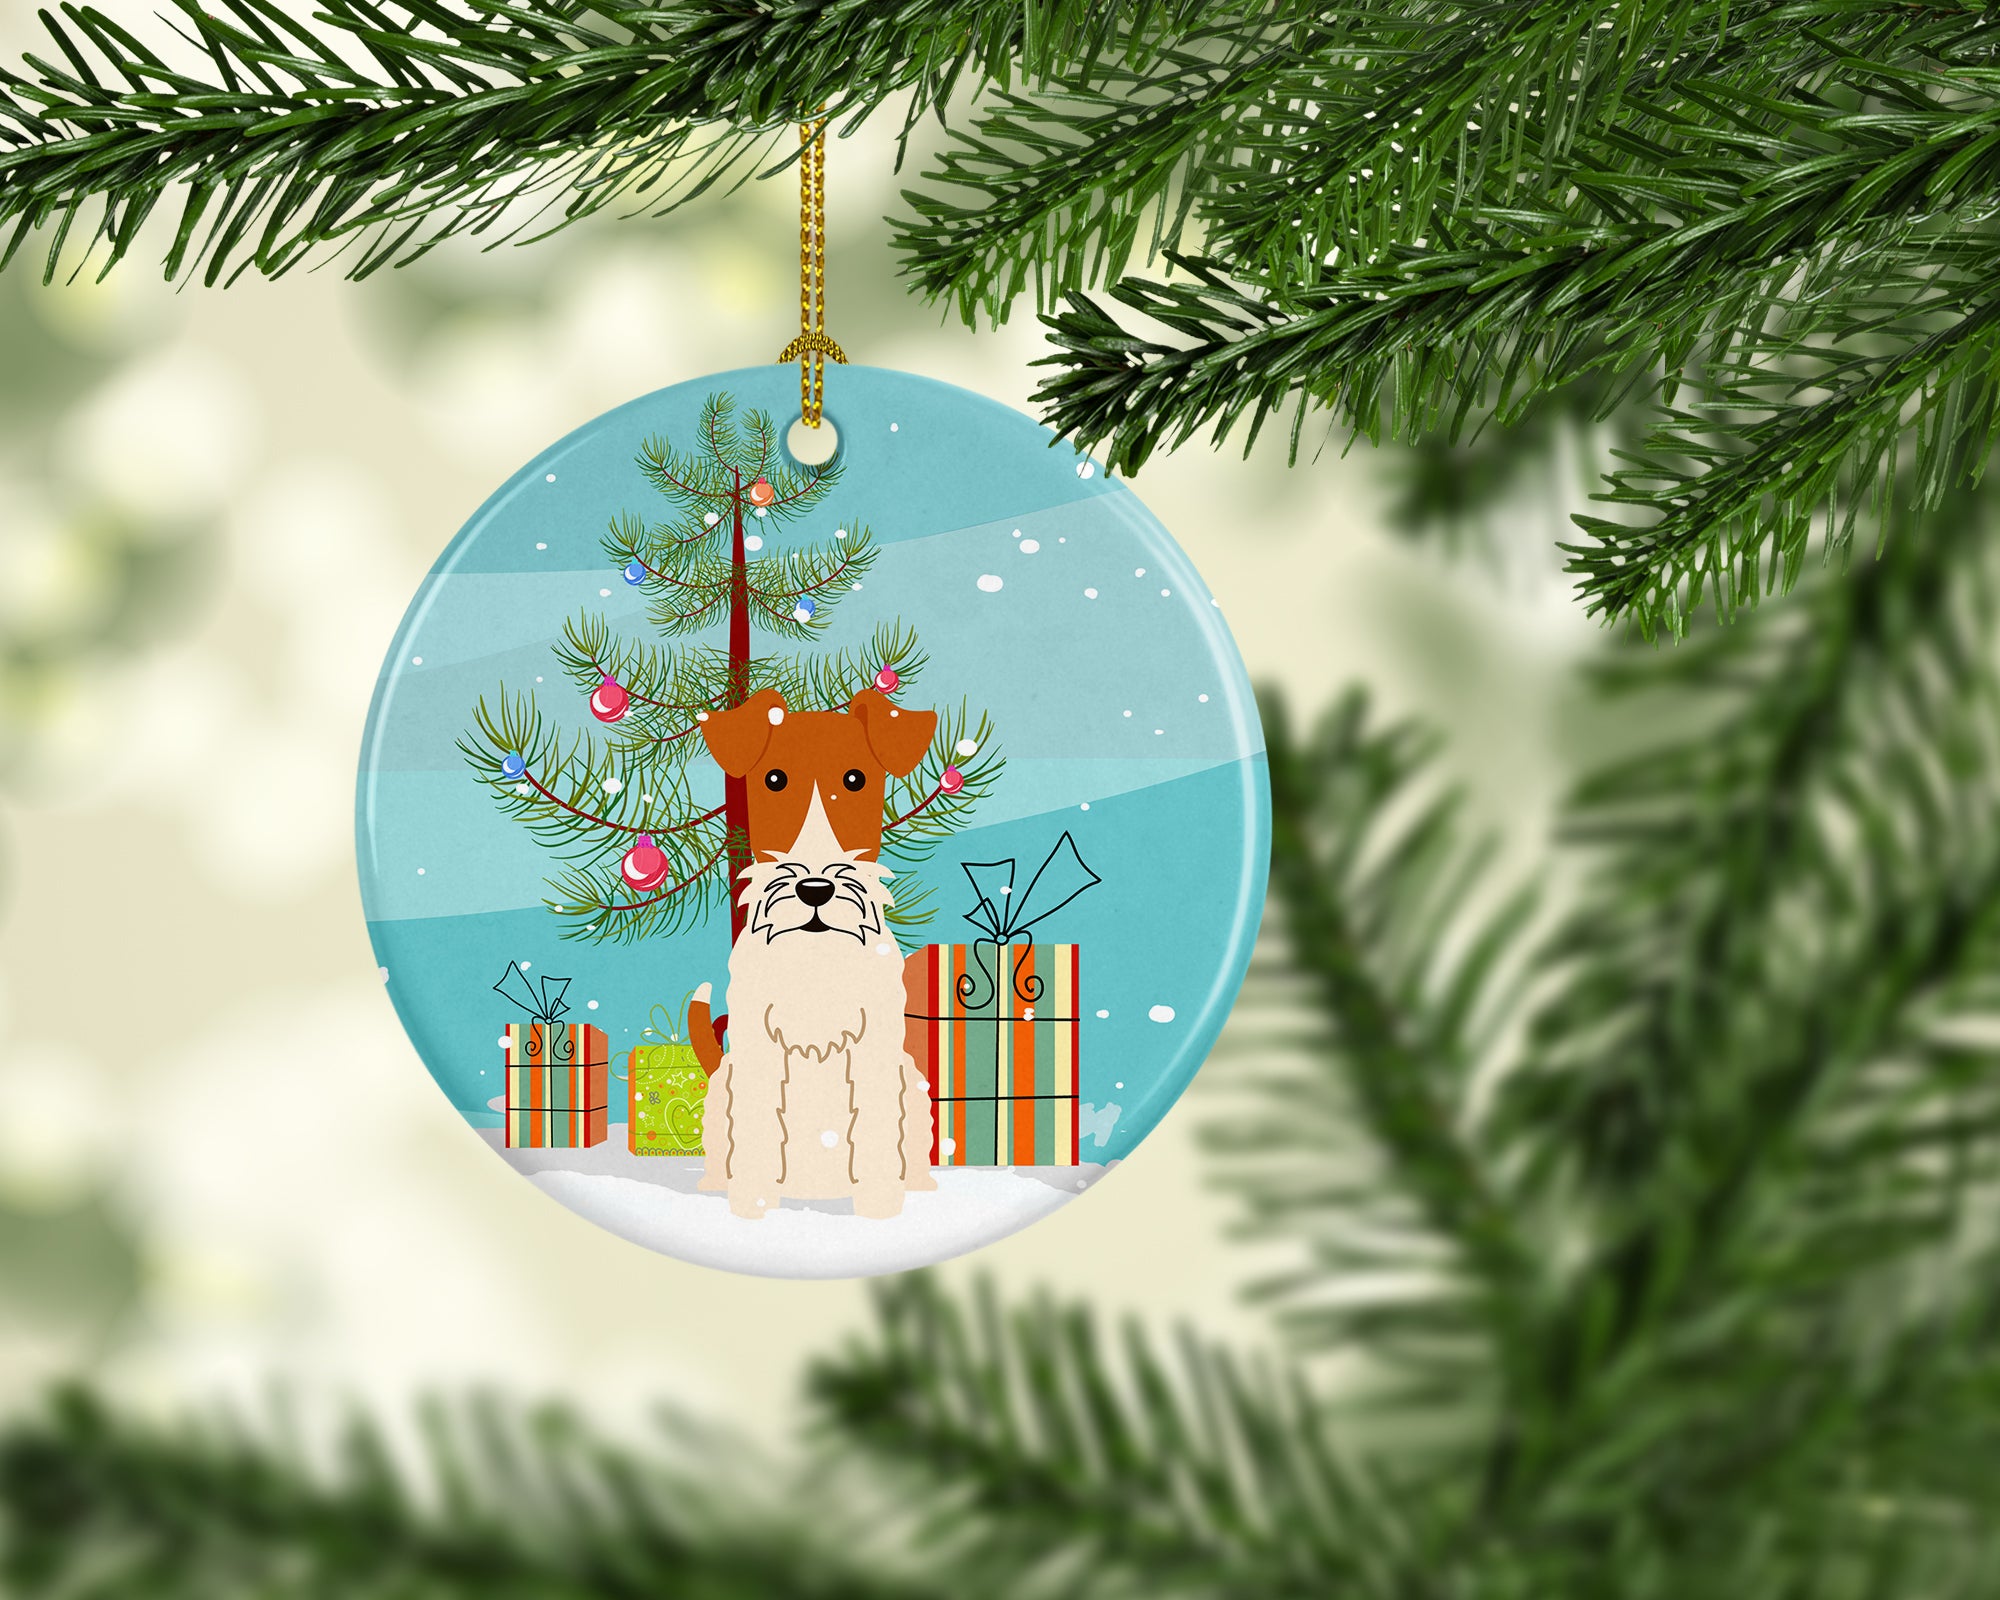 Merry Christmas Tree Wire Fox Terrier Ceramic Ornament BB4226CO1 - the-store.com